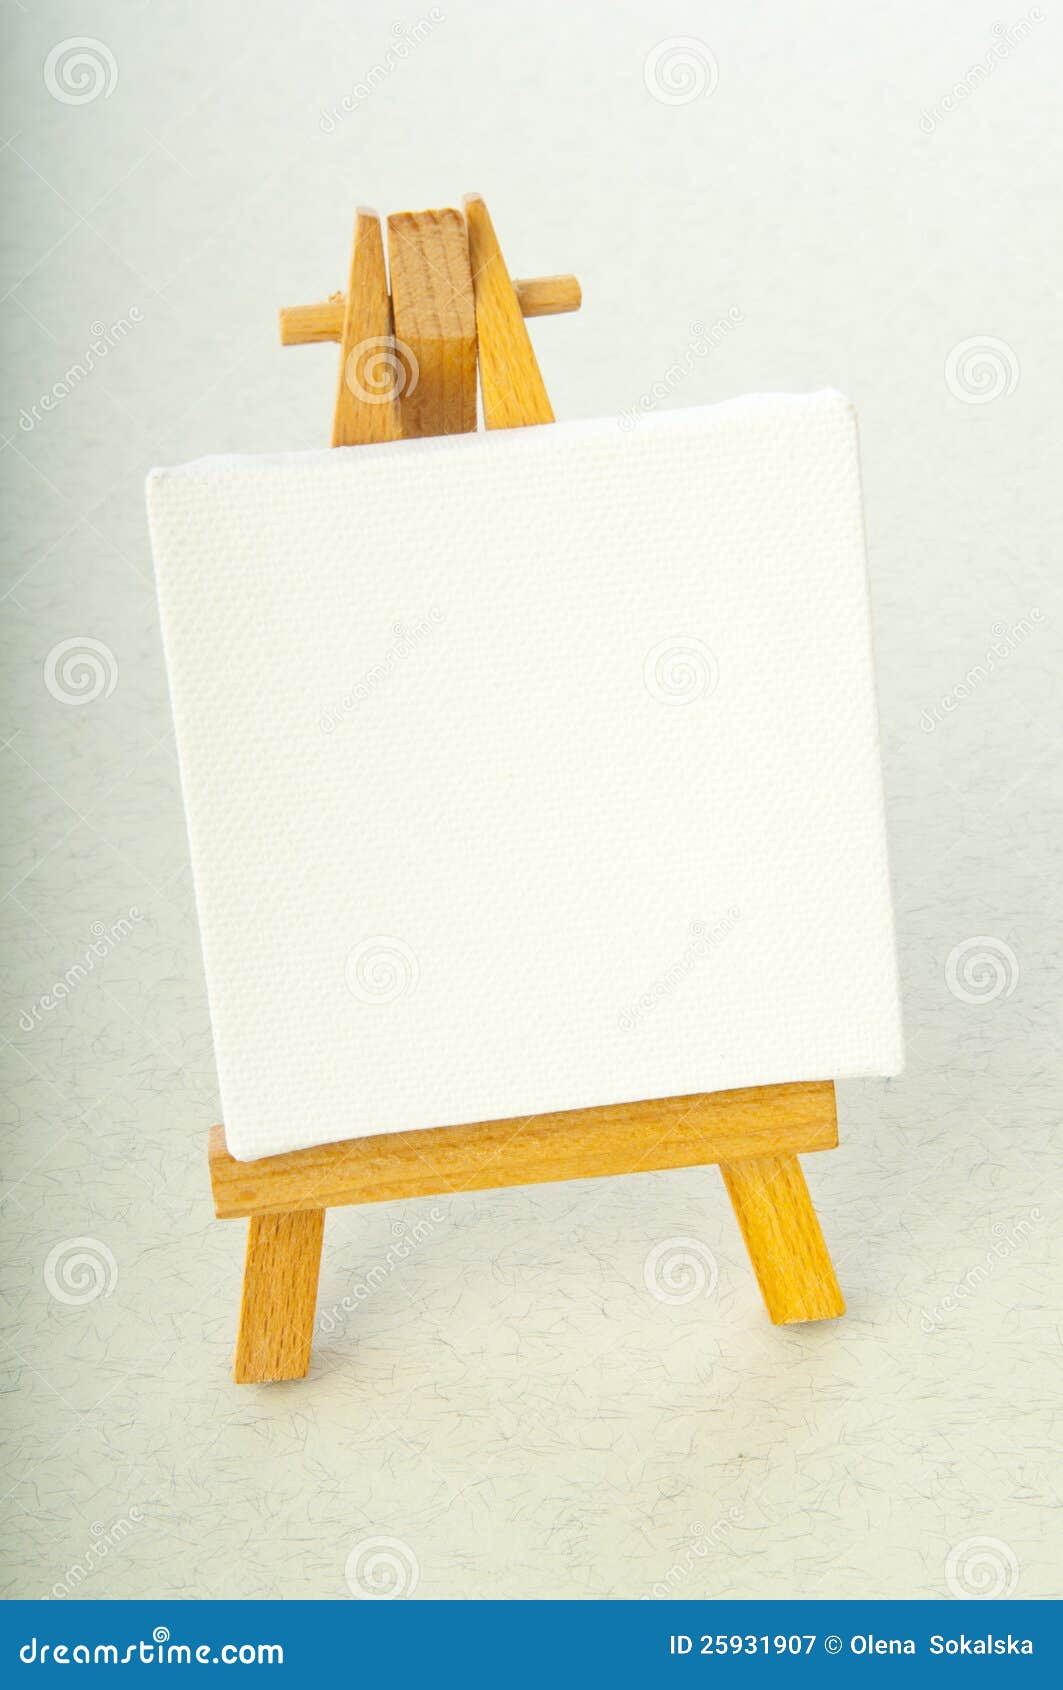 Blank Art Board, Wooden Easel Stock Image - Image of bulletin, color